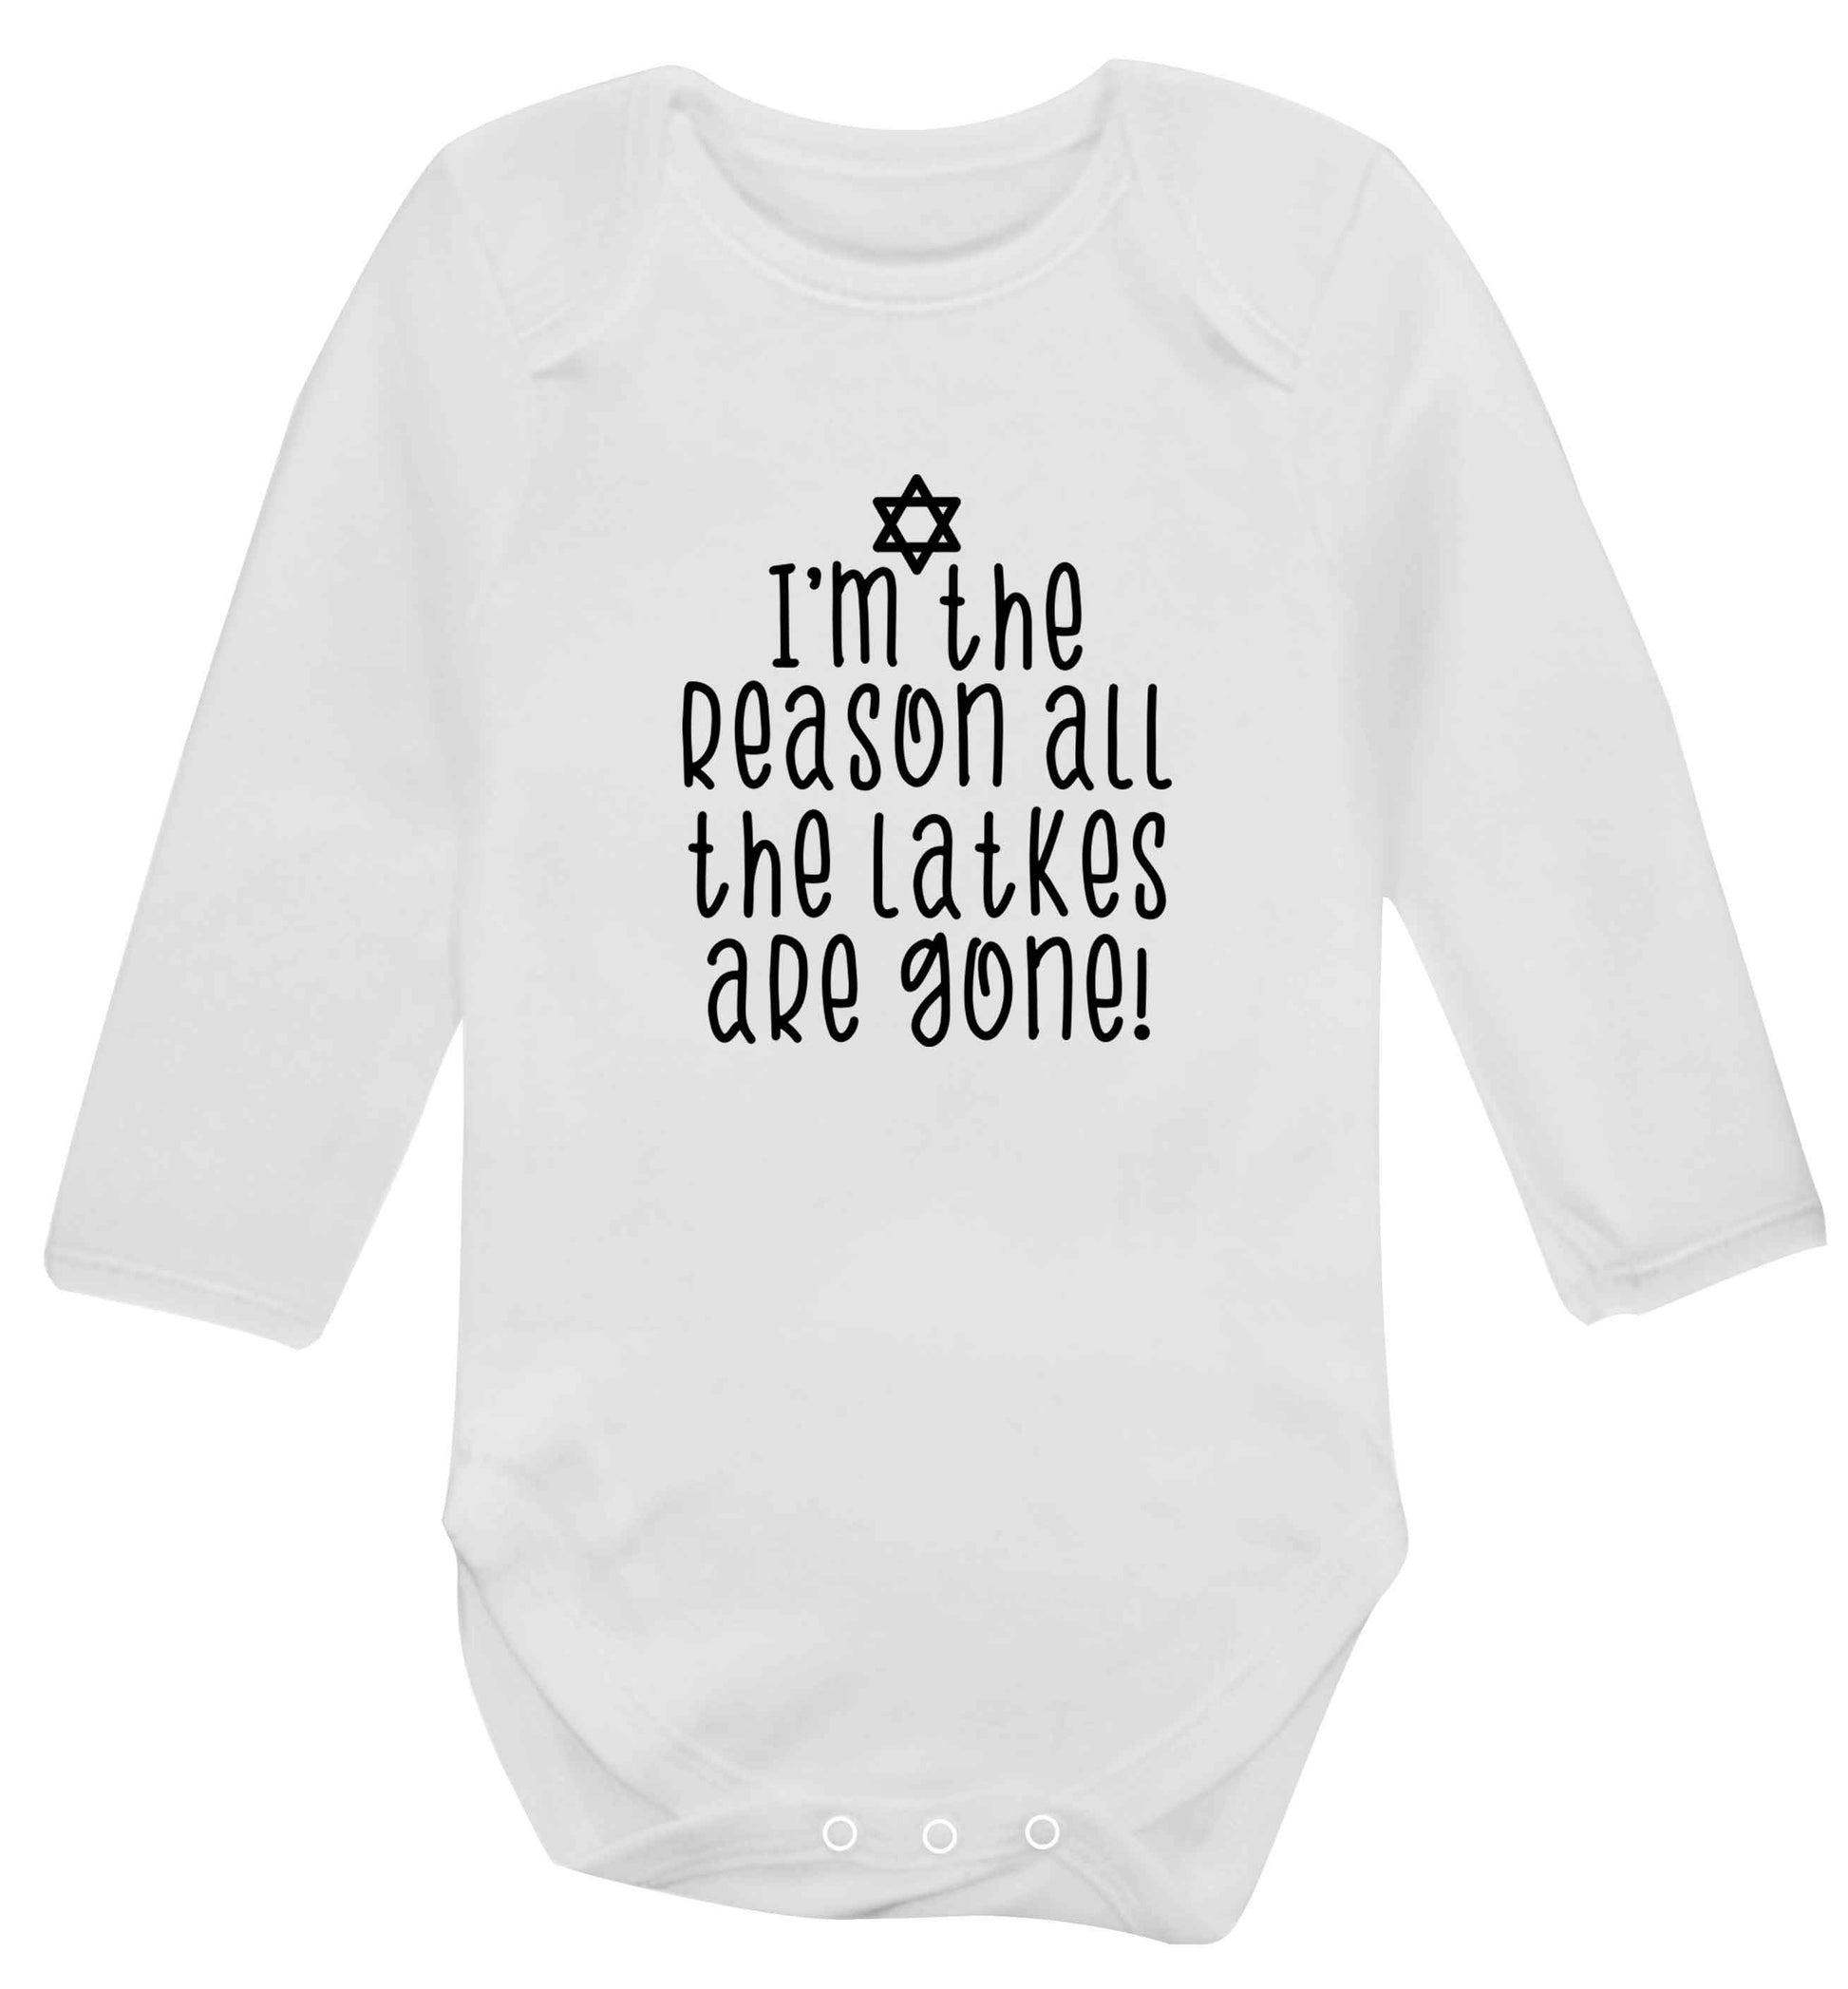 I'm the reason all the latkes are gone baby vest long sleeved white 6-12 months